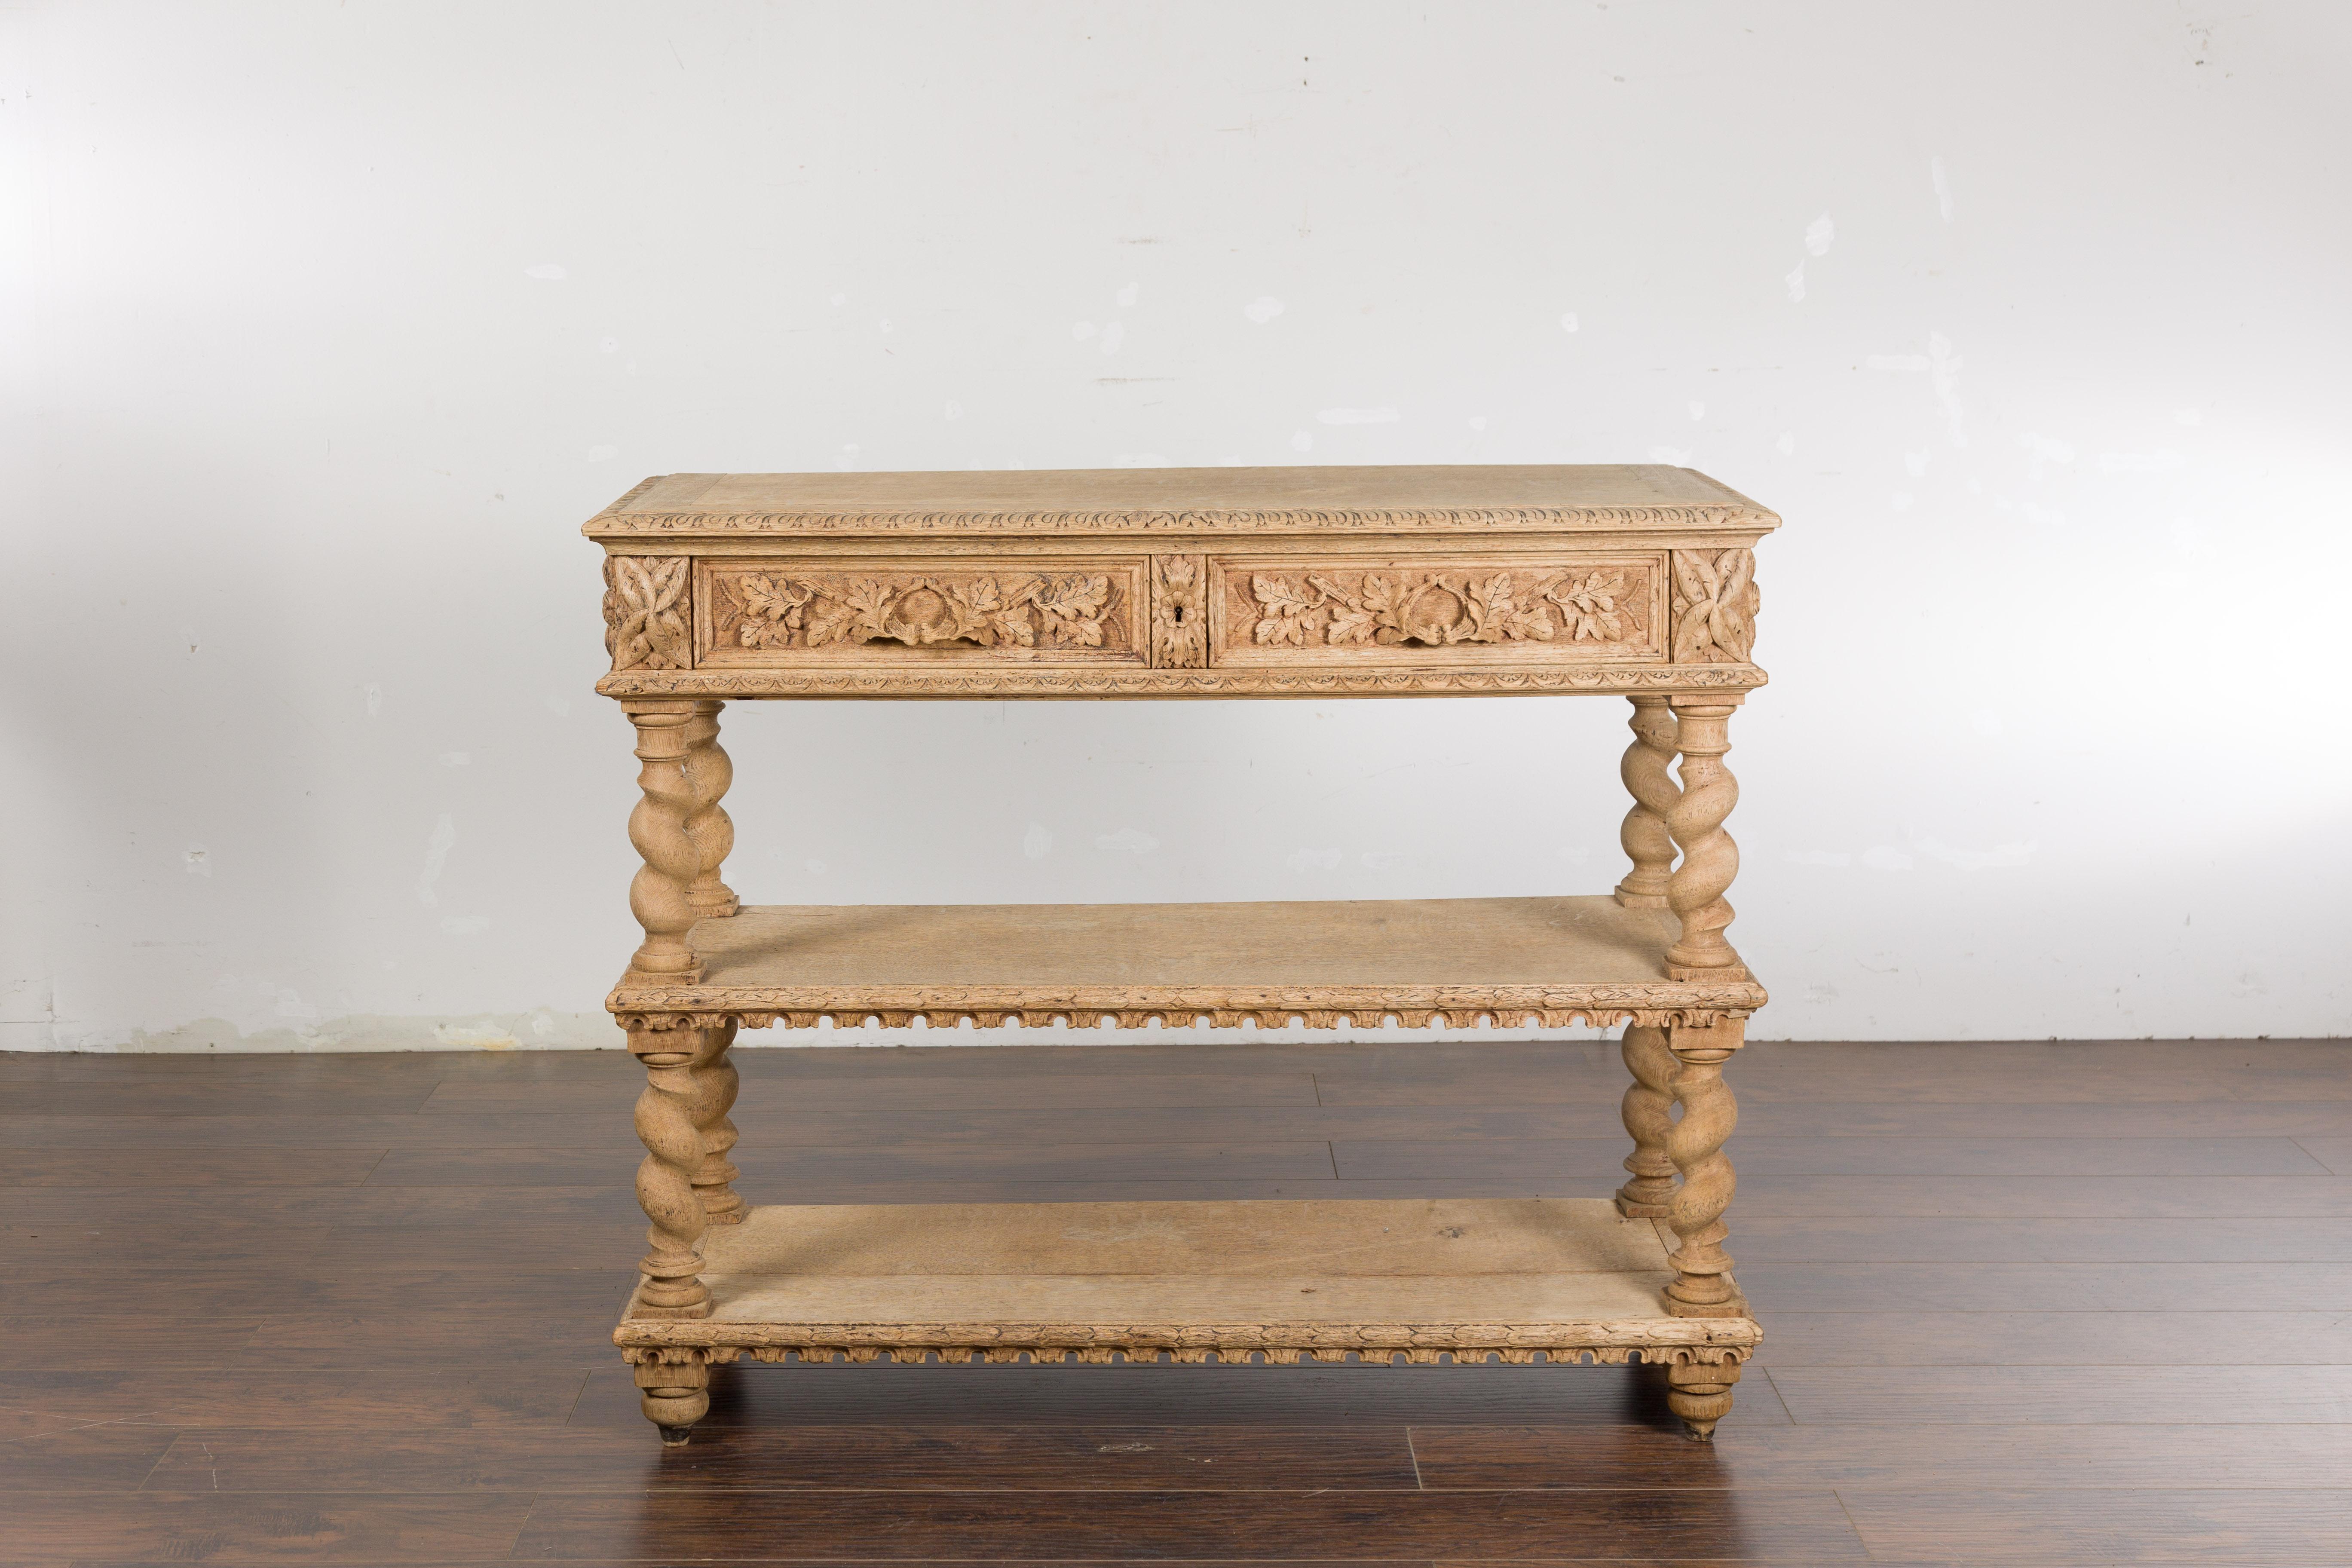 An English oak console table circa 1880 with barley twist base, two foliage carved drawers and two lower shelves. Capture the timeless elegance of English craftsmanship with this stunning oak console table from the late 19th century. Crafted circa